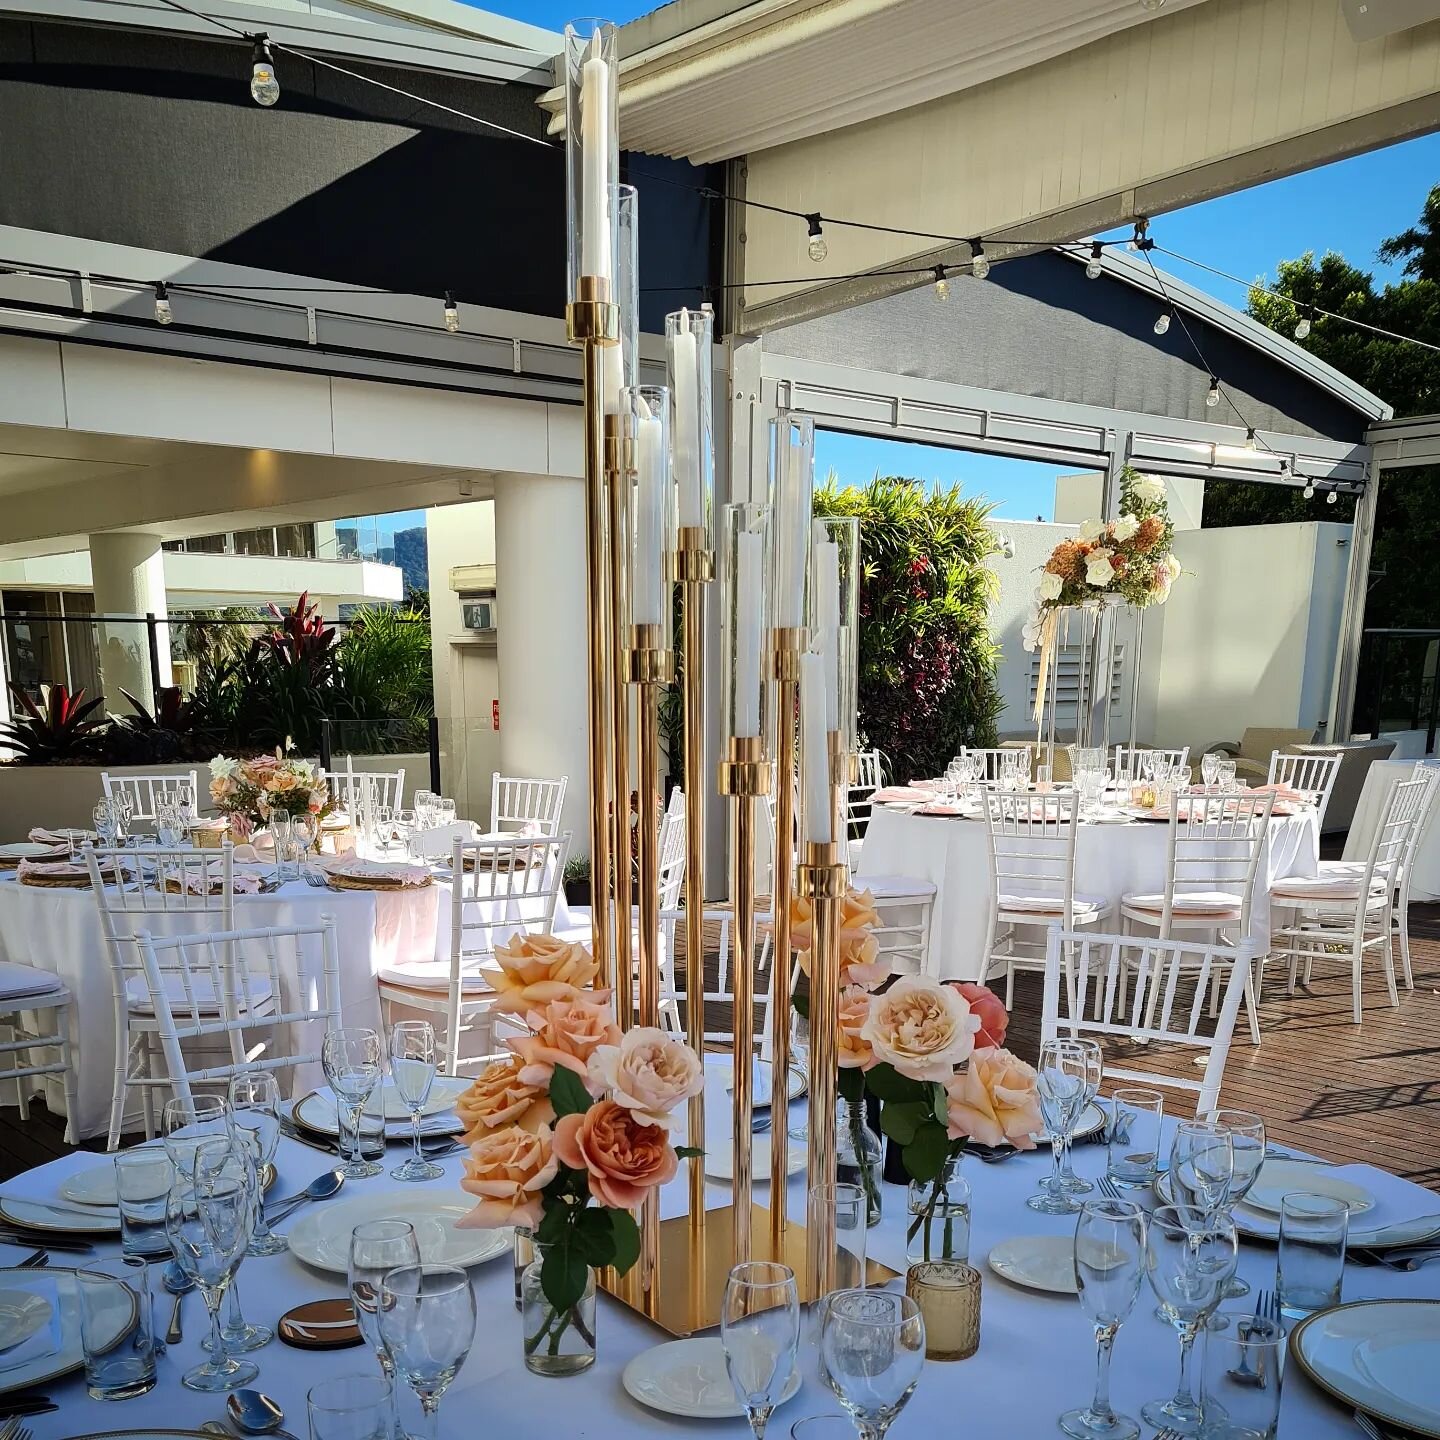 JULIETTE CANDELABRA
Part of our Luxe range to use in conjunction with gorgeous elevated florals. 8 arm spiralled gold and glass standing over 1m high. Dramatic, modern romance. It's a yes from us!
Link in bio to enquire about our hire range ✨️

#cand